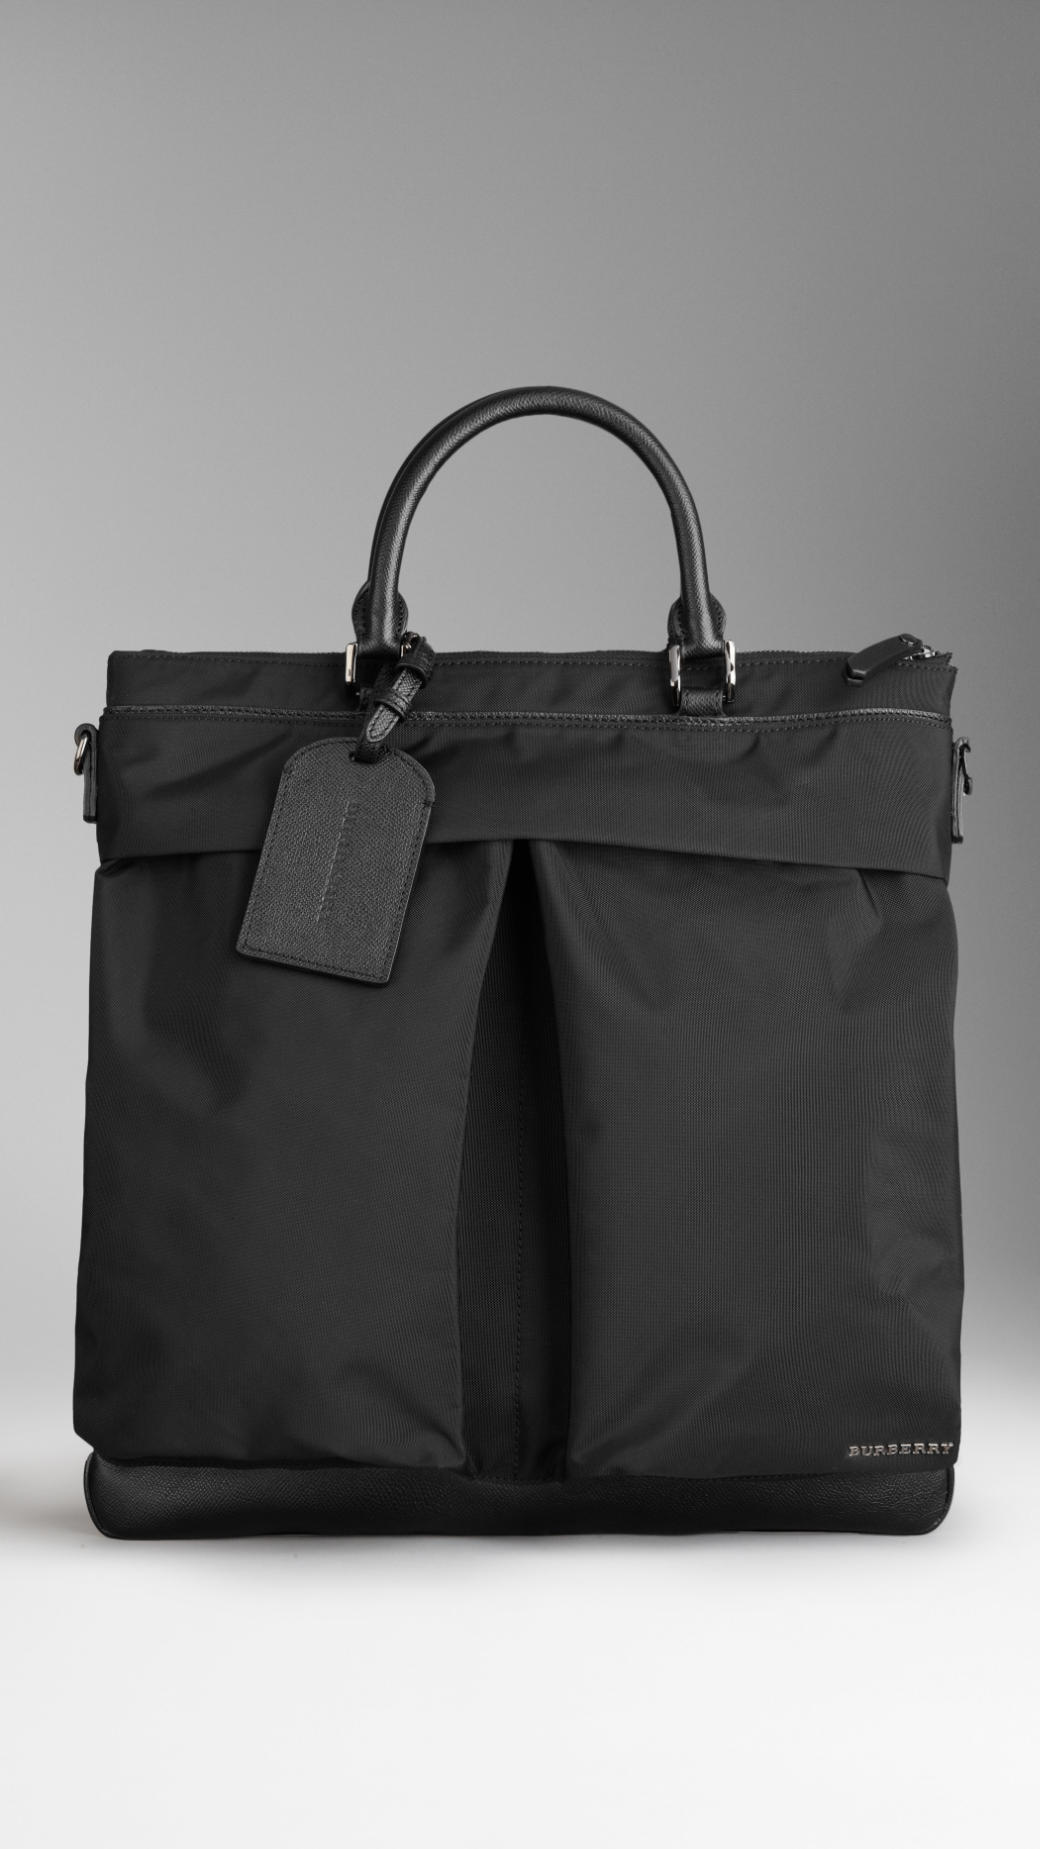 Burberry London Leather and Nylon Tote Bag in Black | Lyst